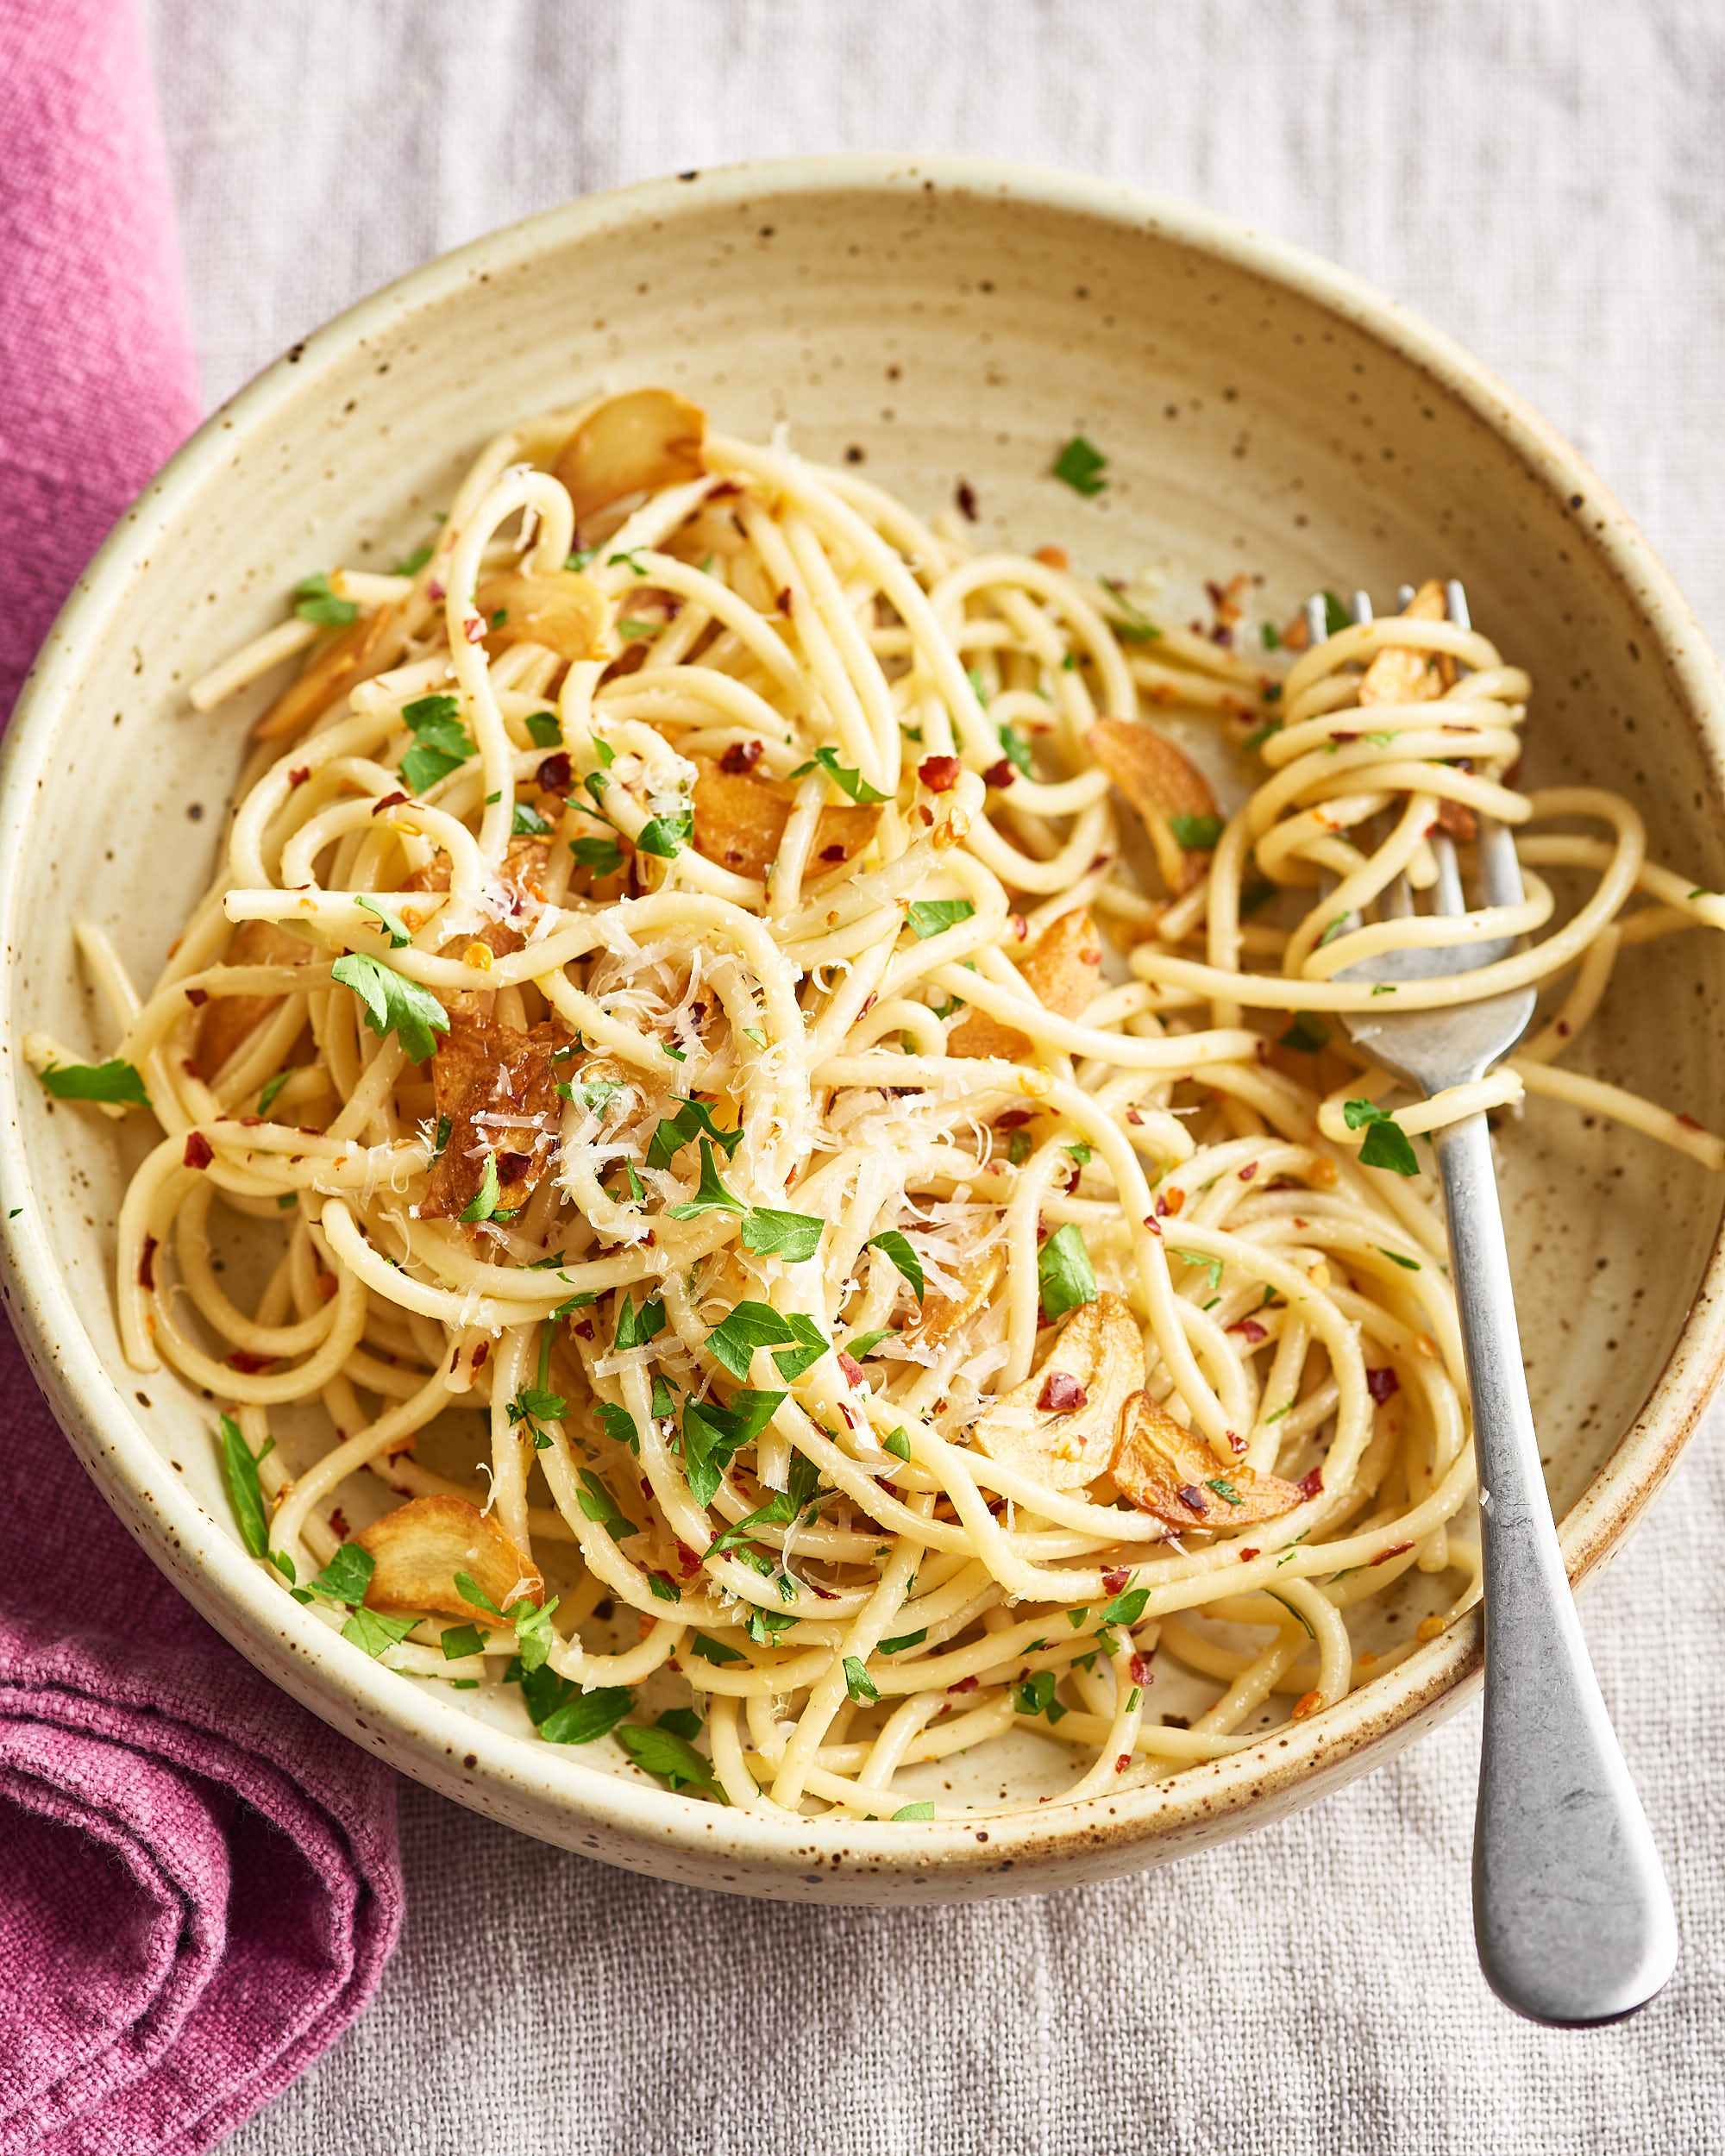 Resepi Spaghetti Aglio Olio  It uses only 6 ingredients and takes less